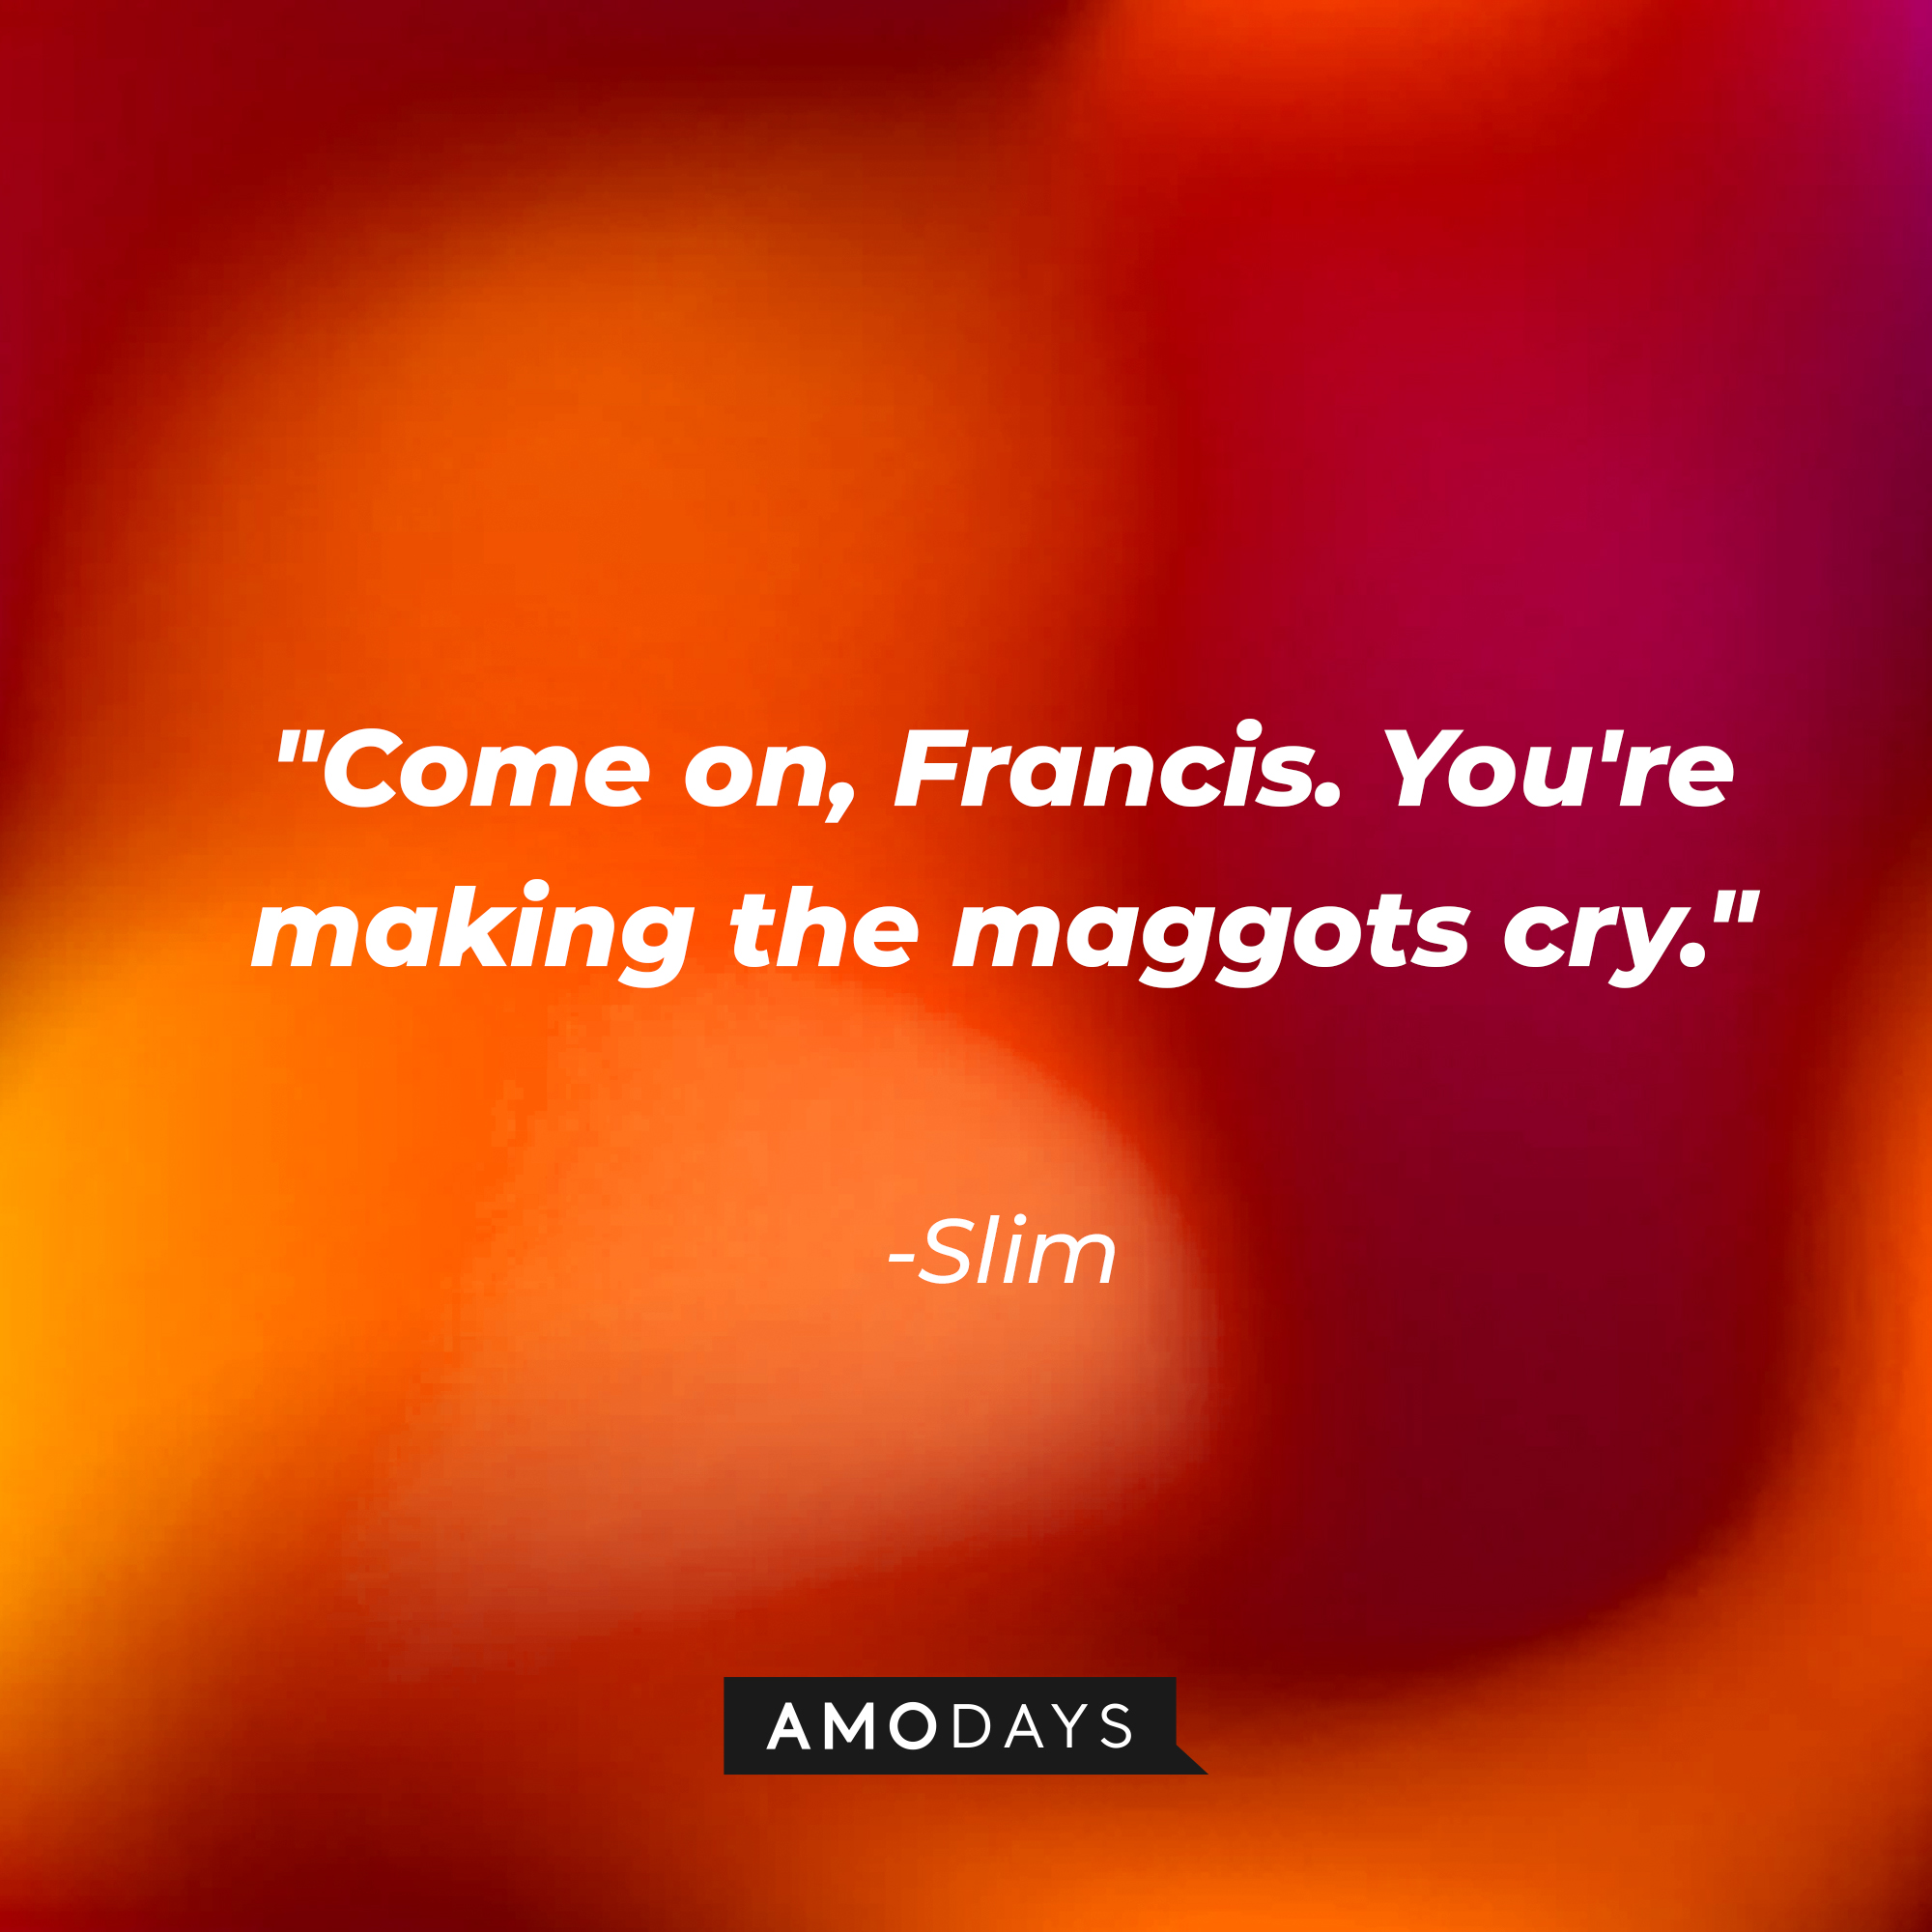 Slim's quote: "Come on, Francis. You're making the maggots cry." | Source: AmoDays